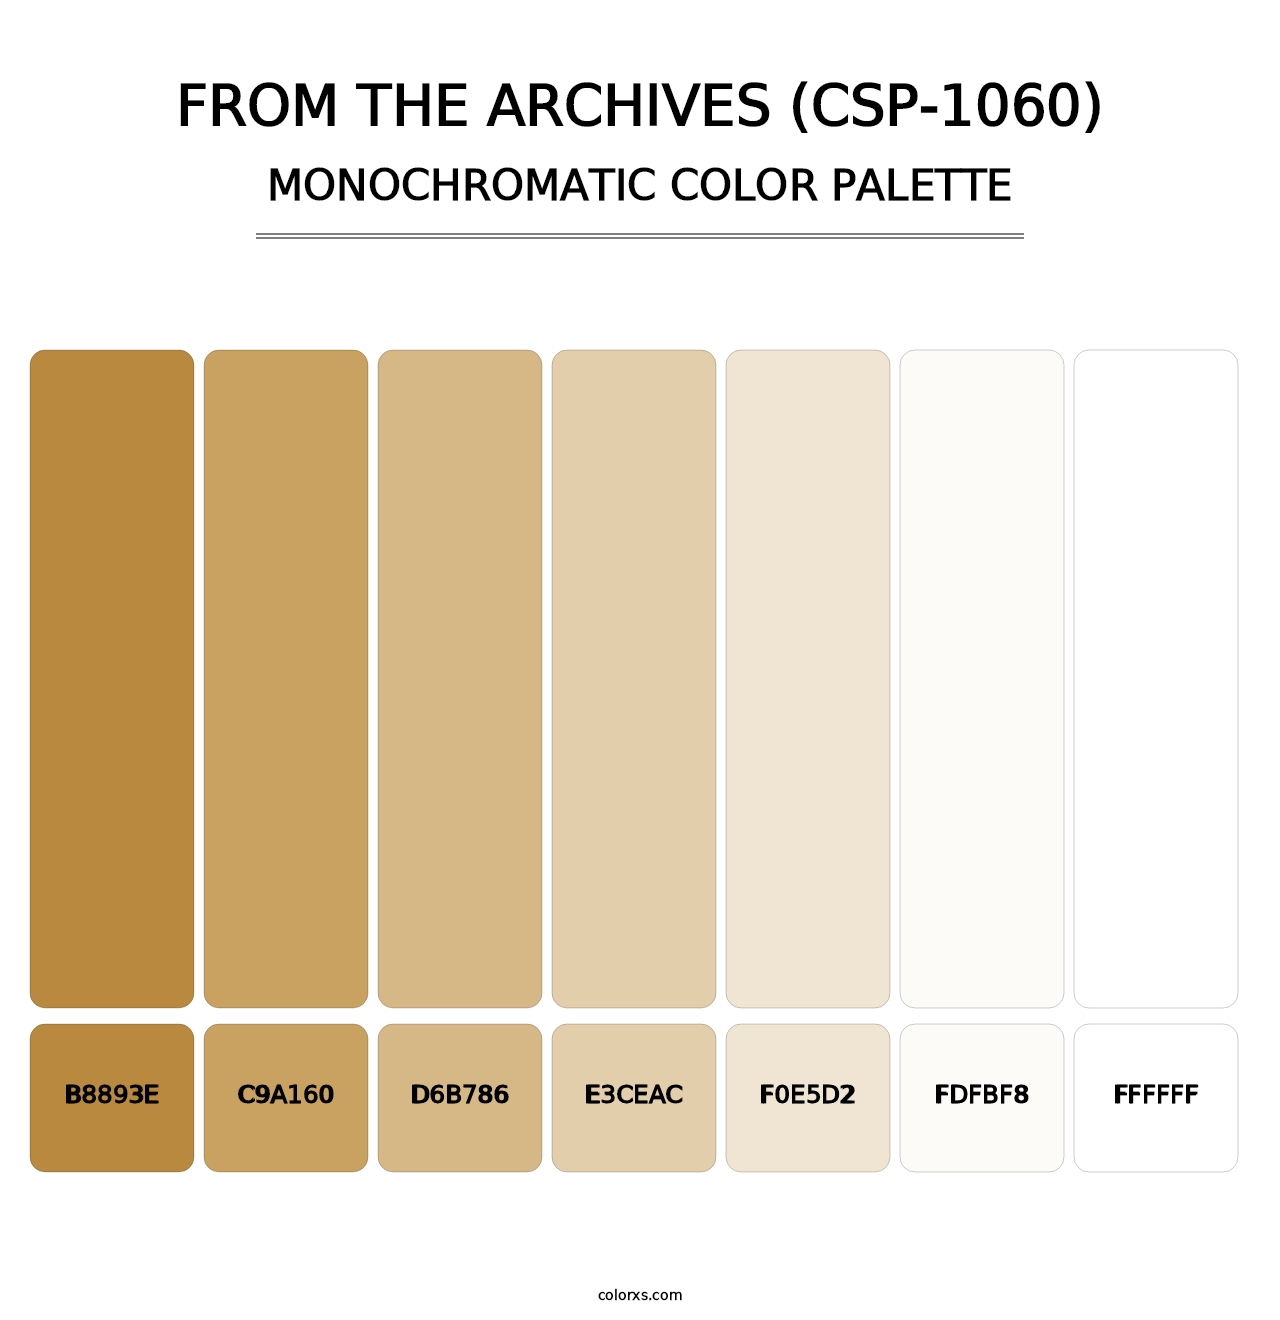 From the Archives (CSP-1060) - Monochromatic Color Palette